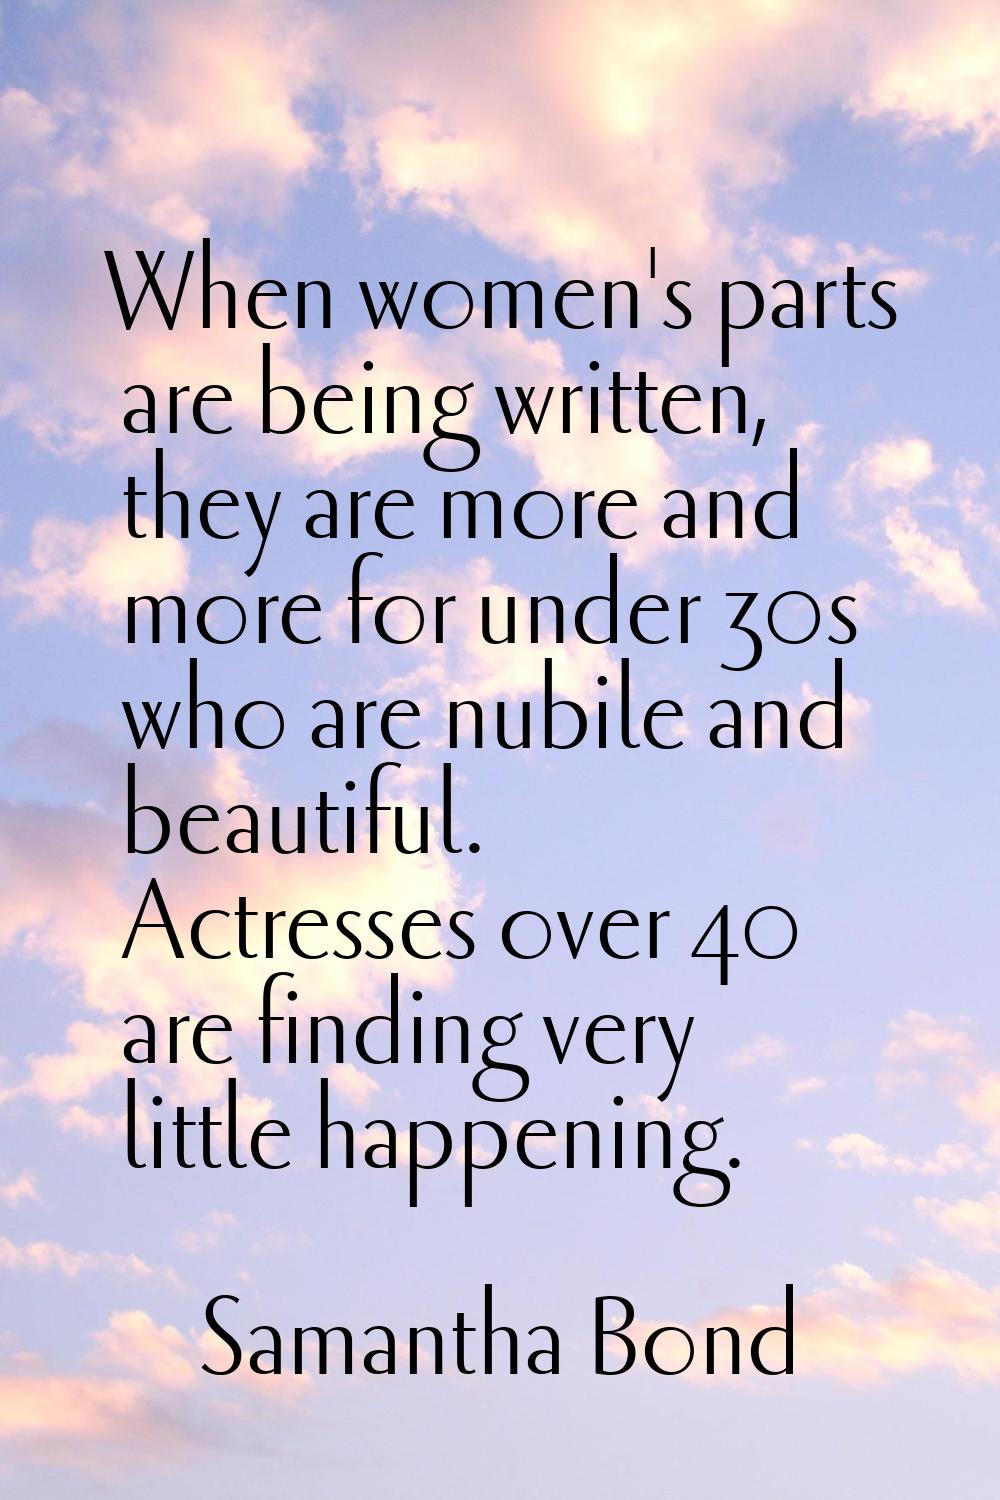 When women's parts are being written, they are more and more for under 30s who are nubile and beaut